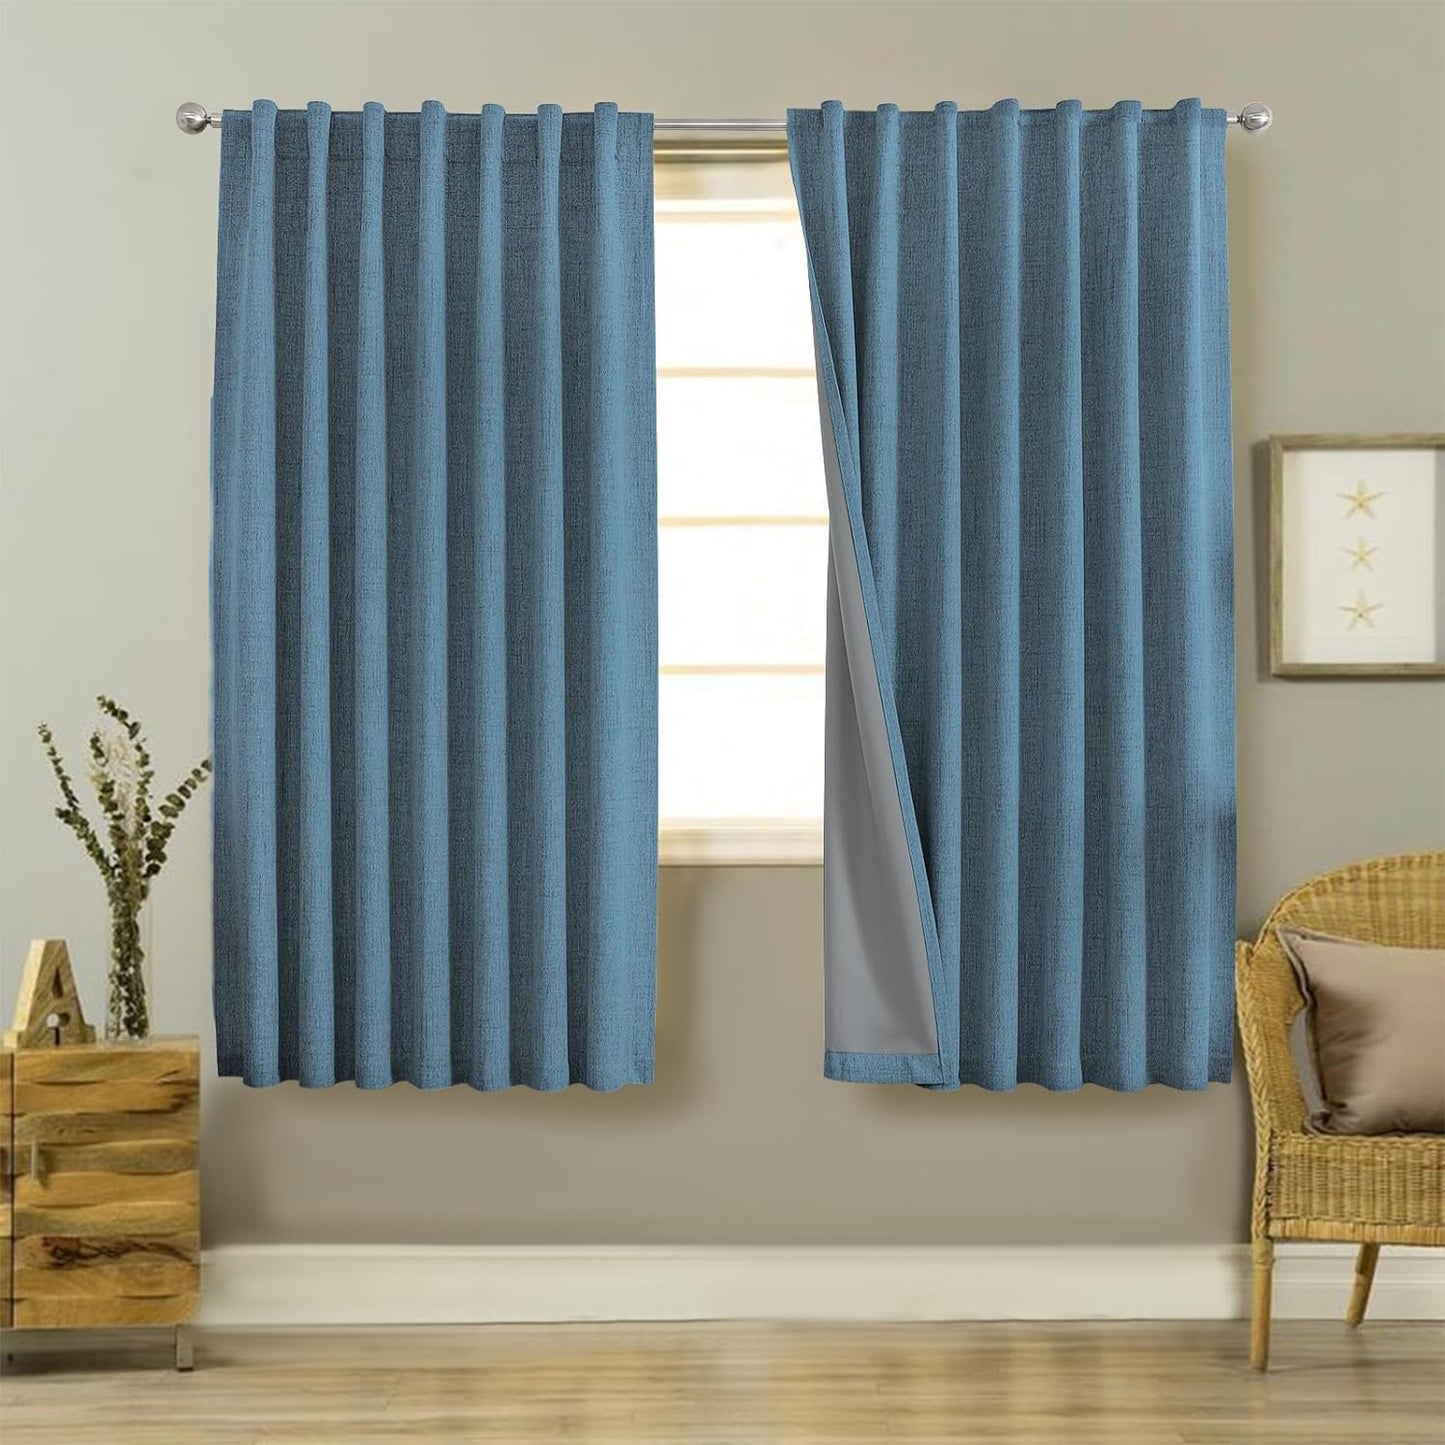 Joydeco 100% Black Out Curtains 96 Inch Long 1 Panels Burg Natural Blackout Linen Drapes for Bedroom Living Room Darkening Curtain Thermal Insulated Back Tab Rod Pocket(70X96 Inch,Black)  Joydeco Sky Blue 52W X 72L Inch X 2 Panels 